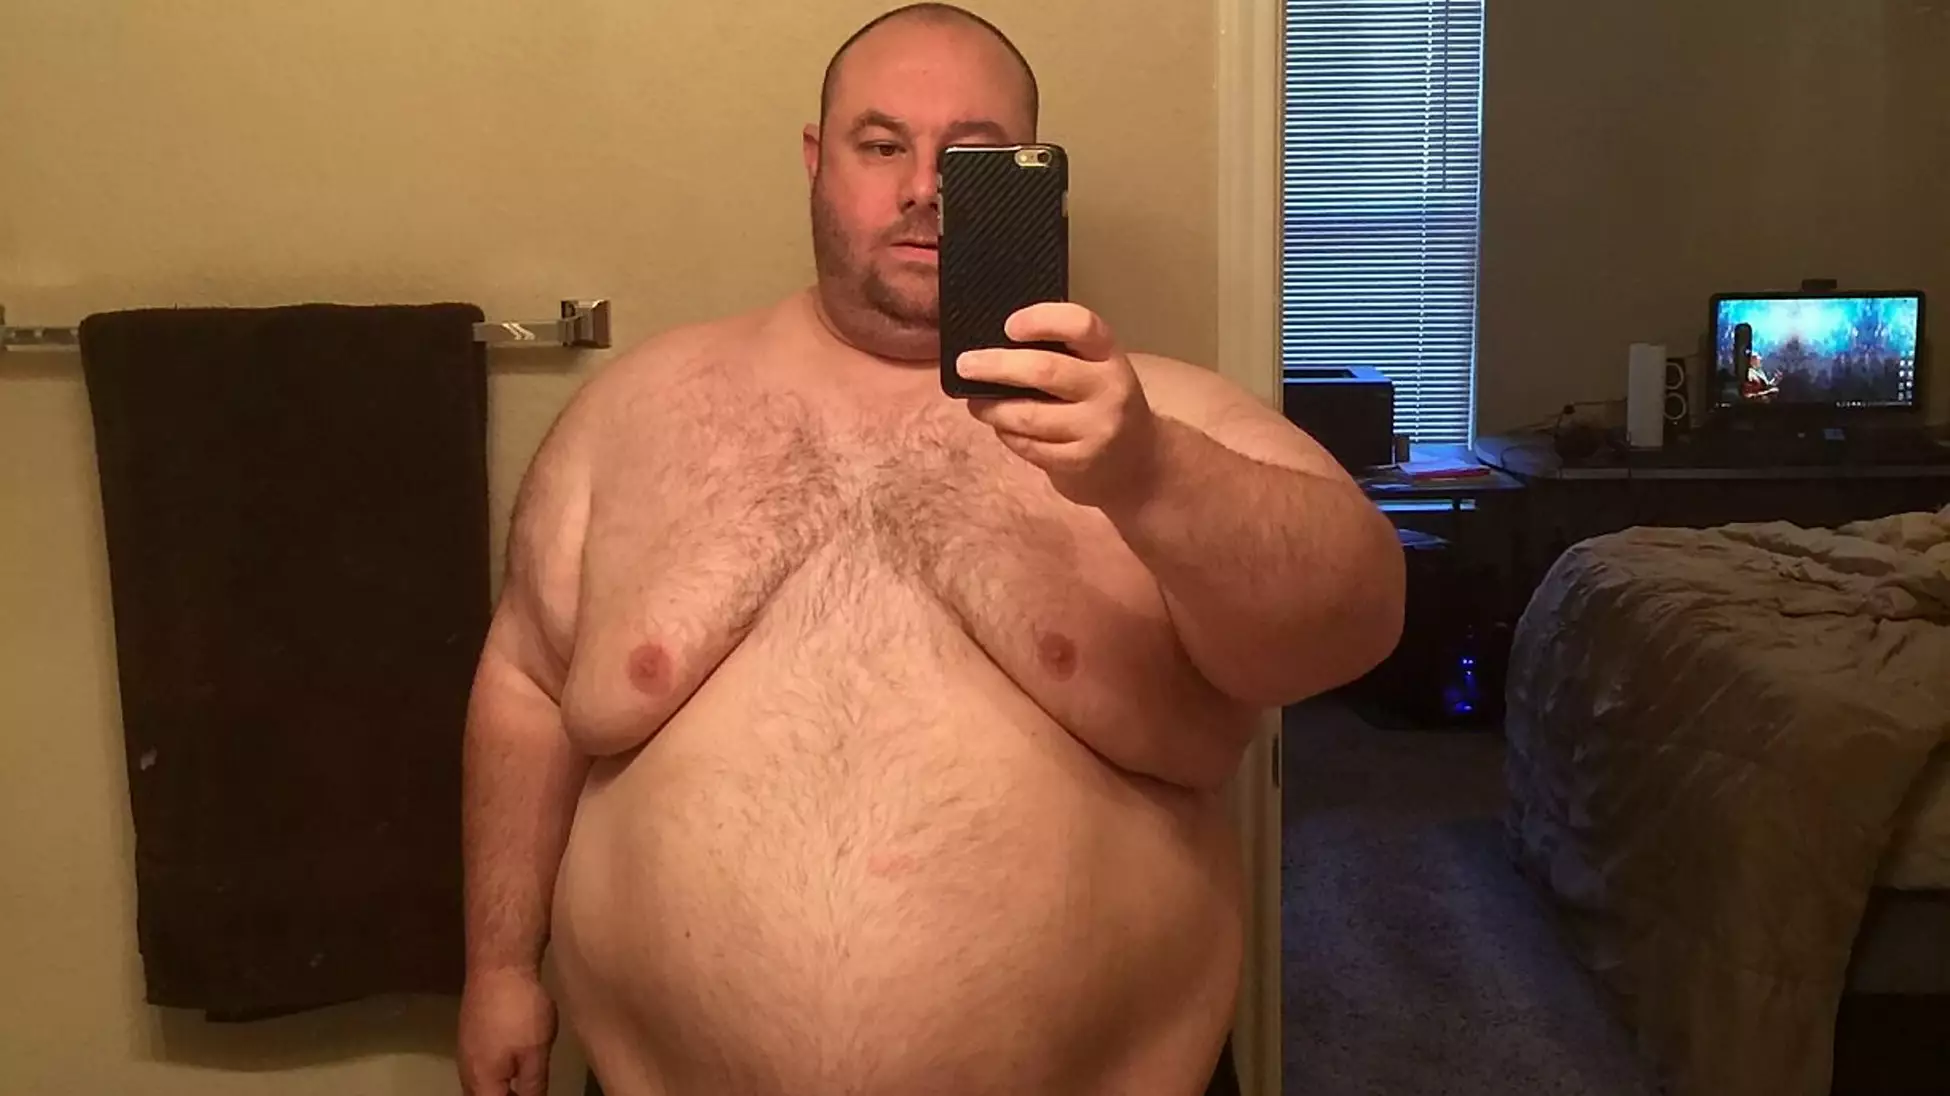 Man Loses 16 Stone After Weight Gain And 'Lack Of Sex Drive' Led To Divorce